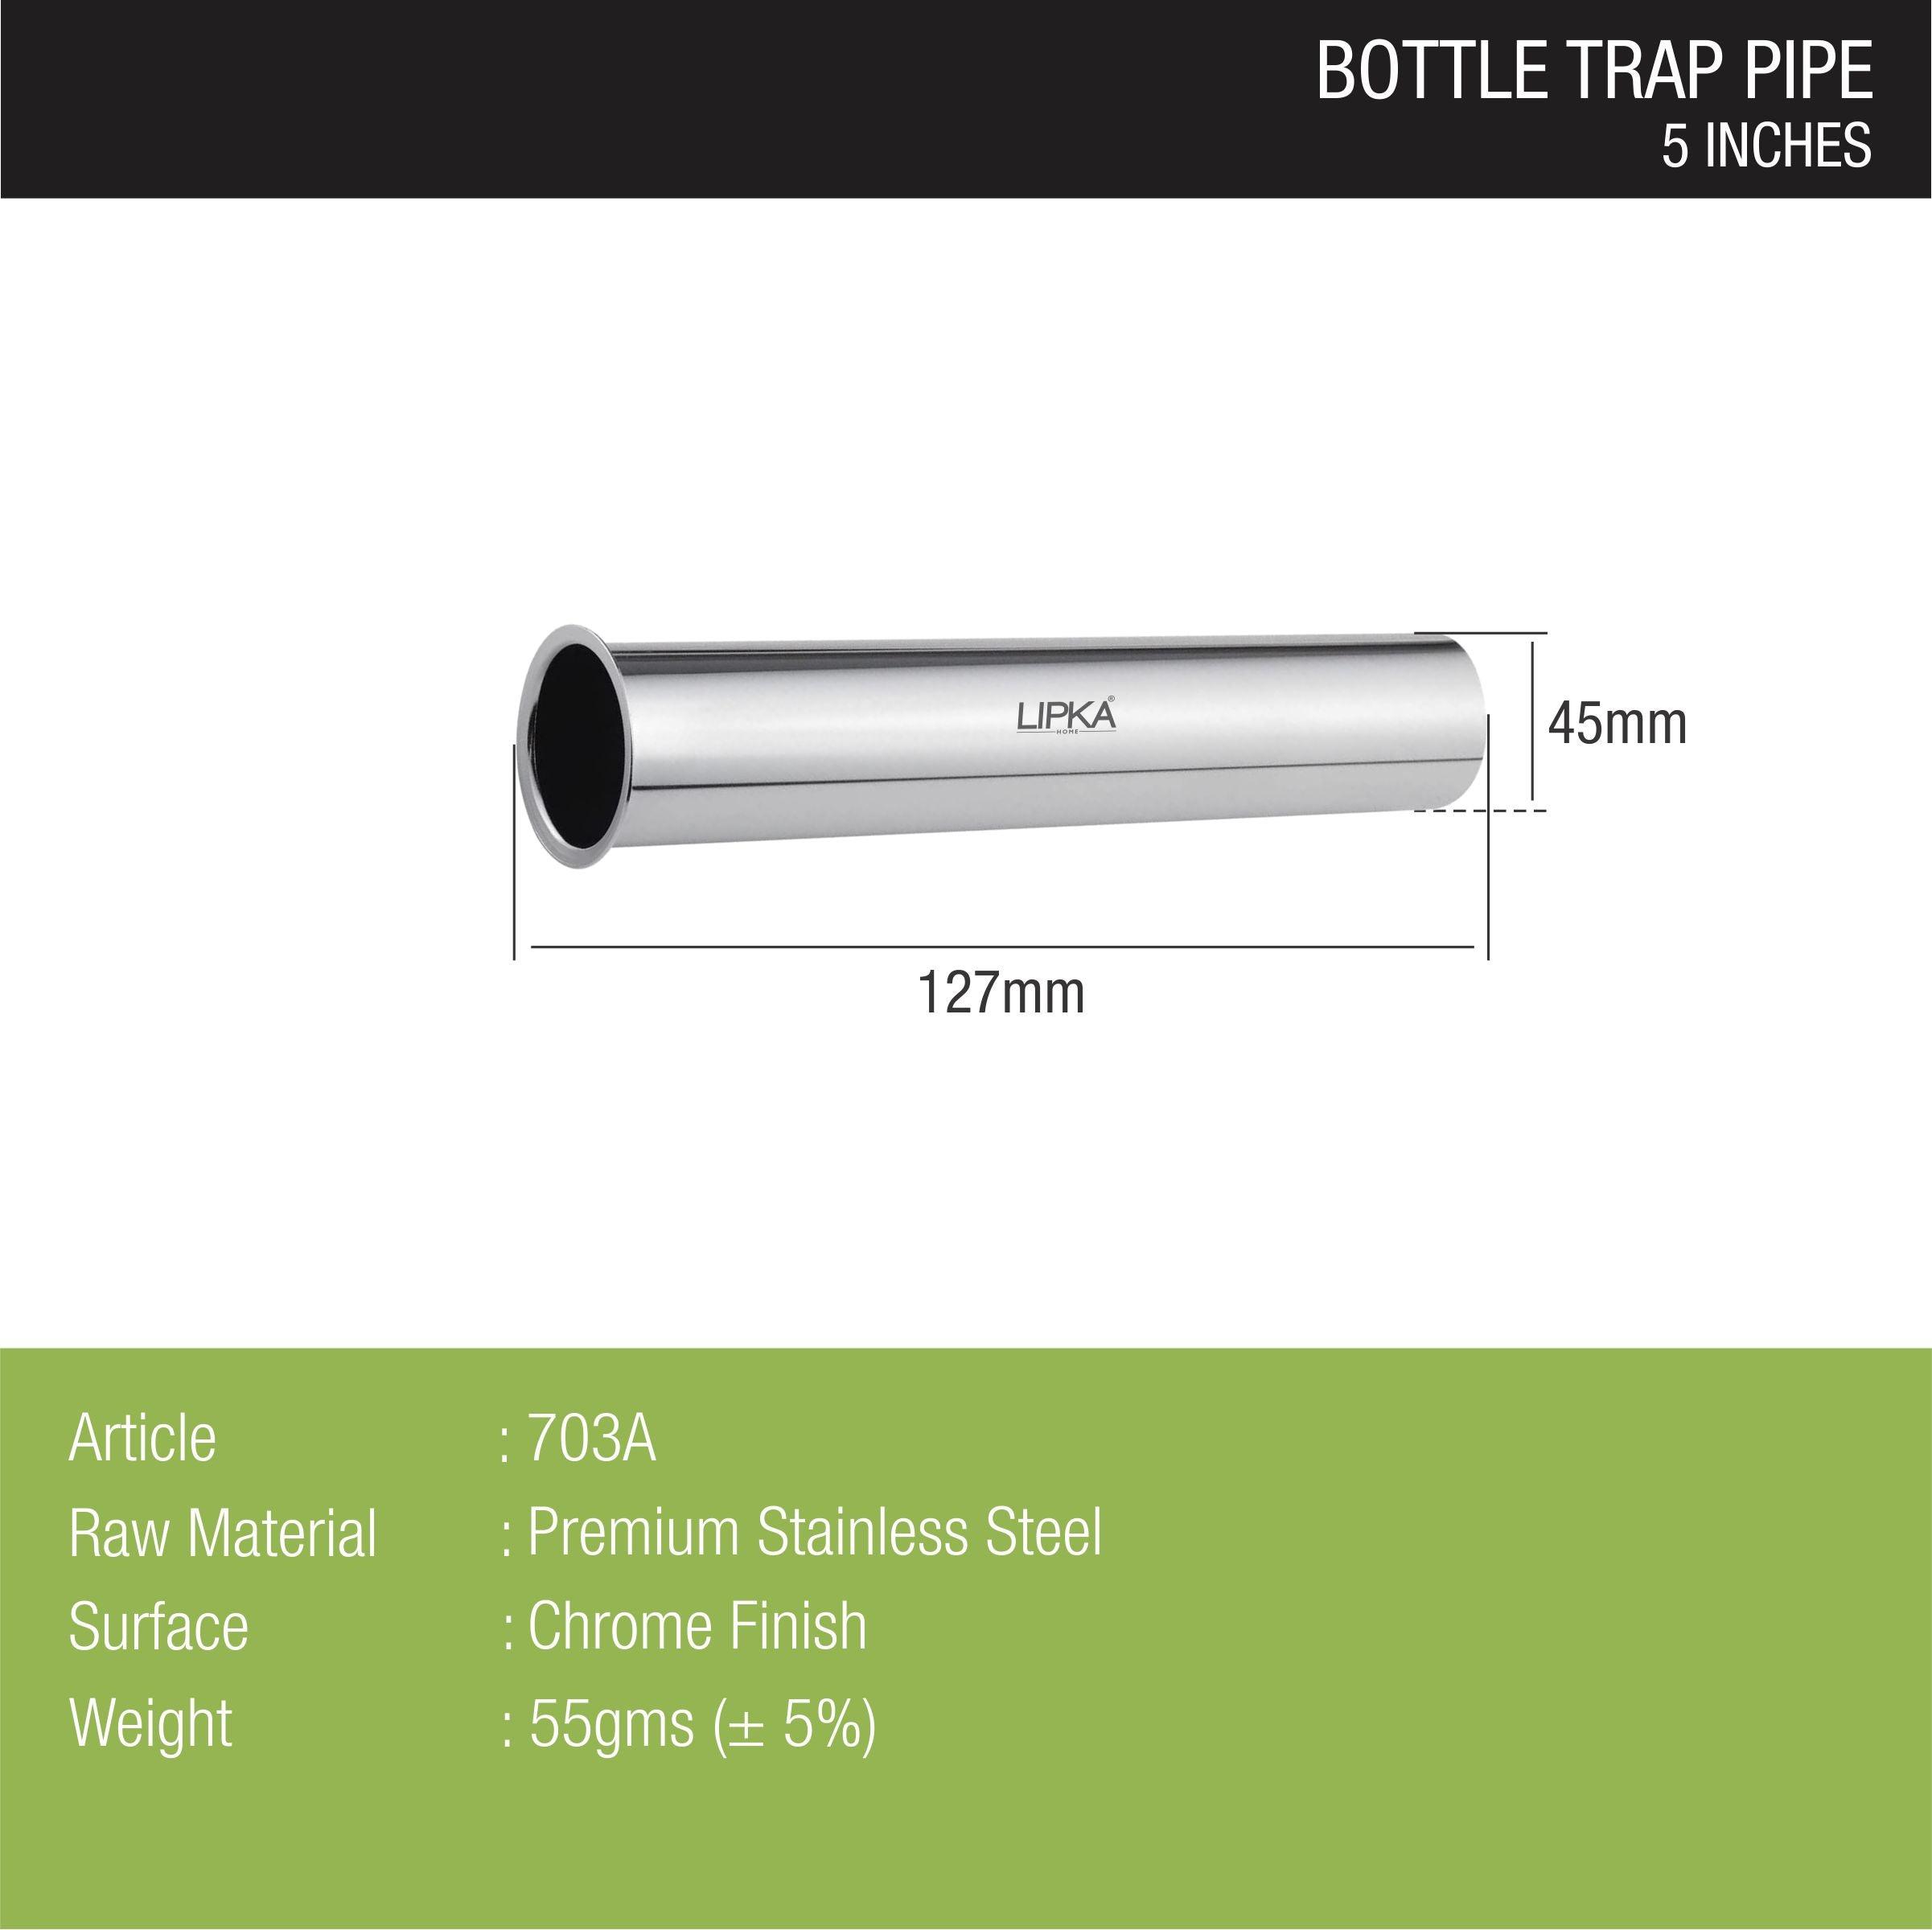 Bottle Trap Stainless Steel Pipe (5 inches) sizes and dimensions